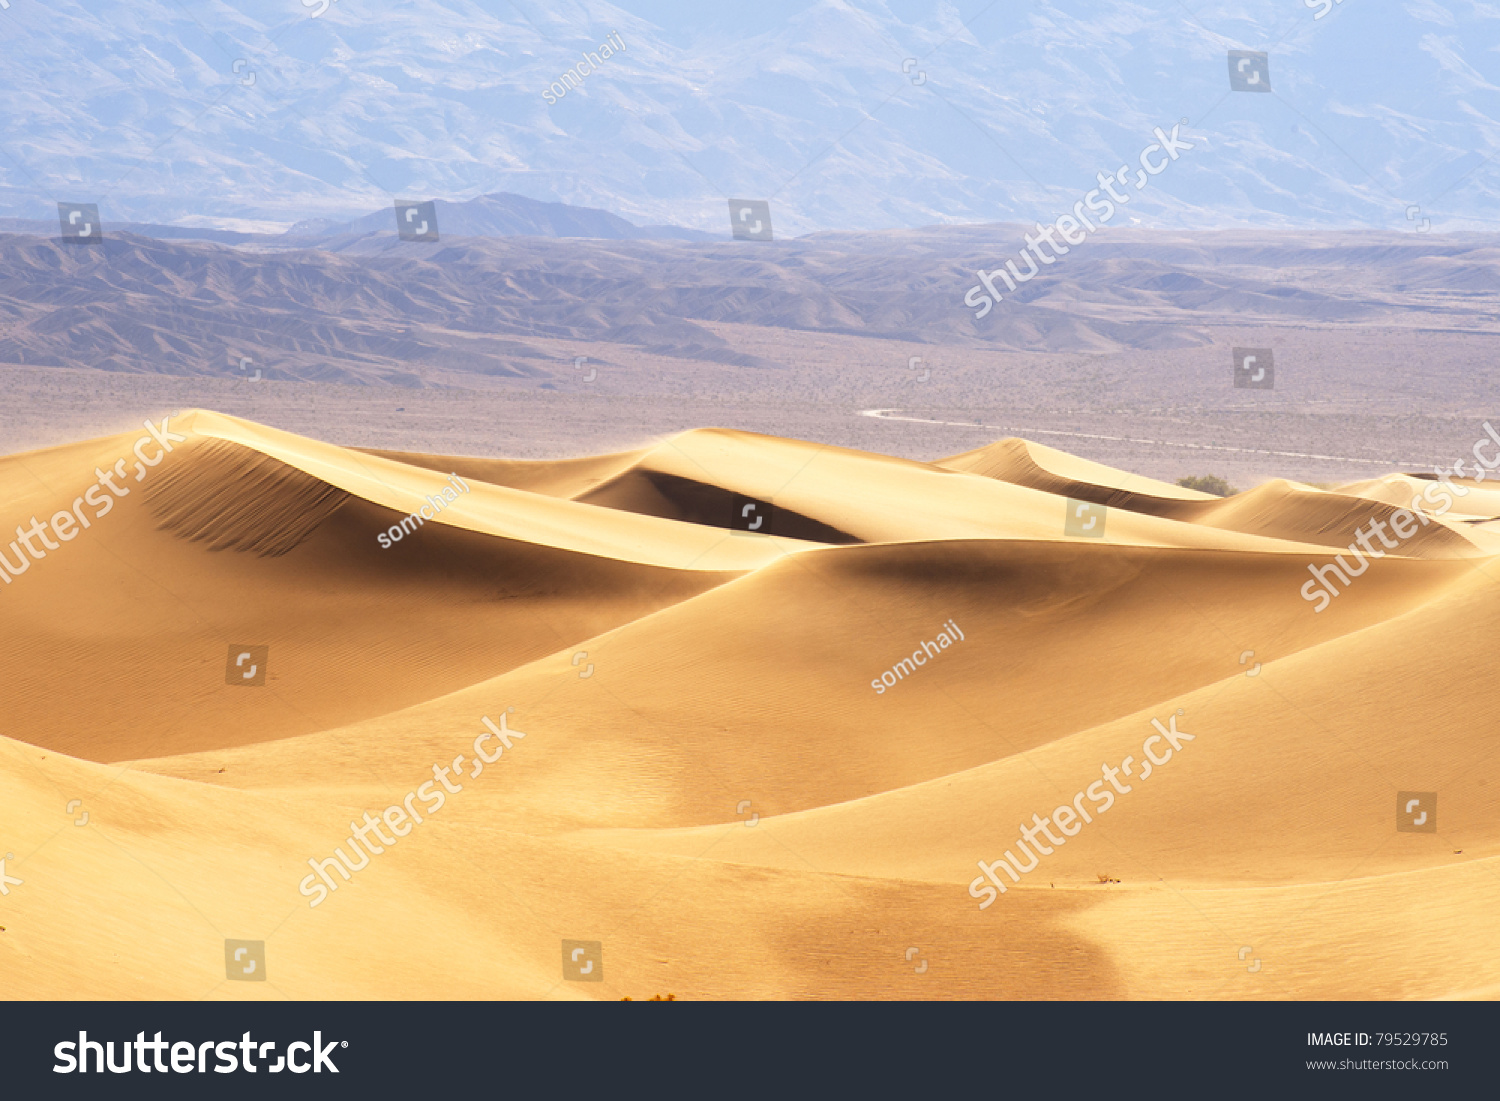 Strong Wind Blows The Sand Of The Sand Dunes In The Desert With ...